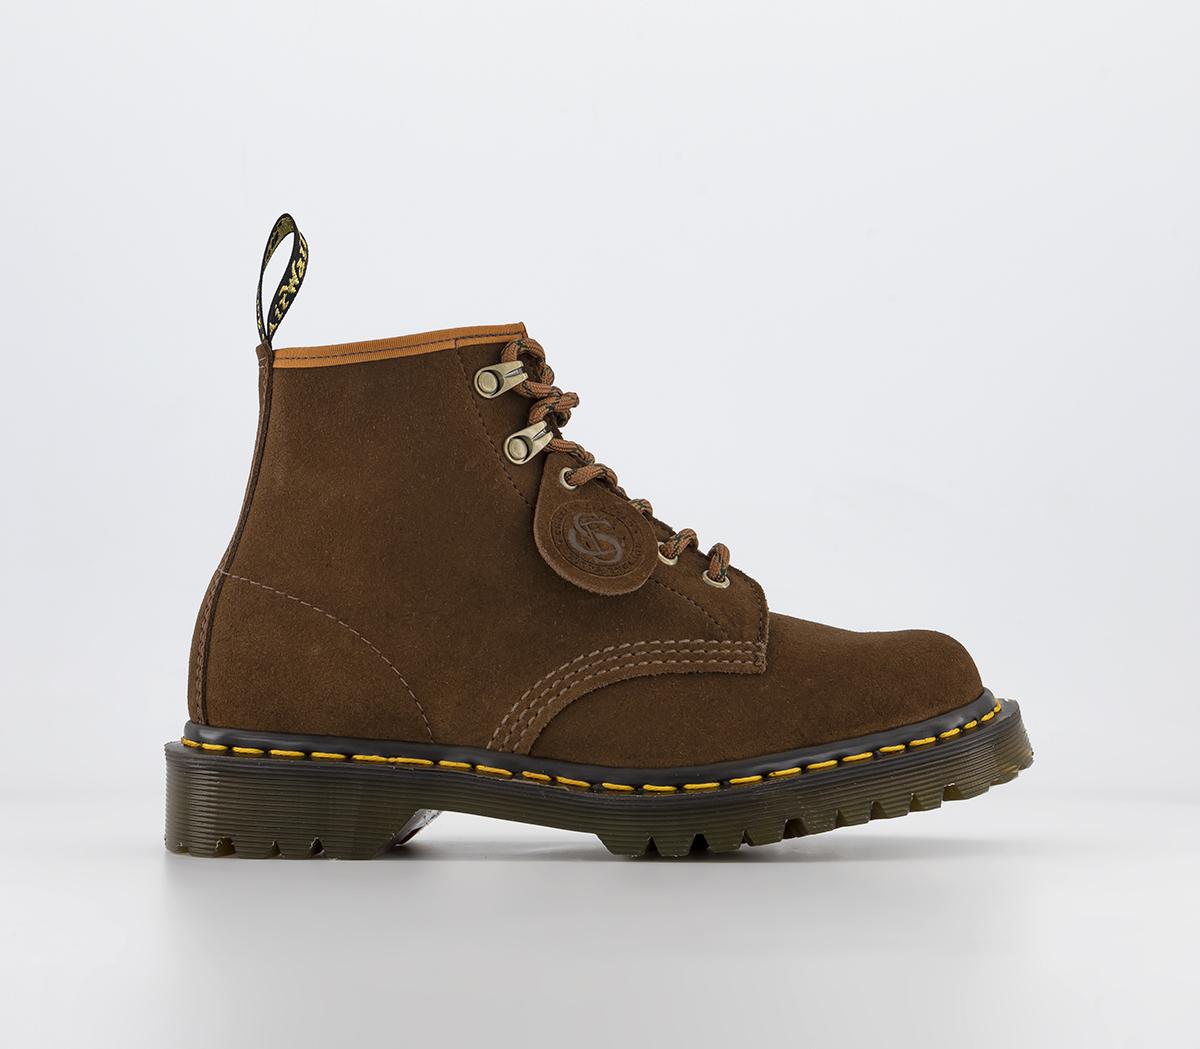 Dr. Martens Mie 101 6 Eye Boots Tan Repello Calf Suede - Women'S Ankle Boots